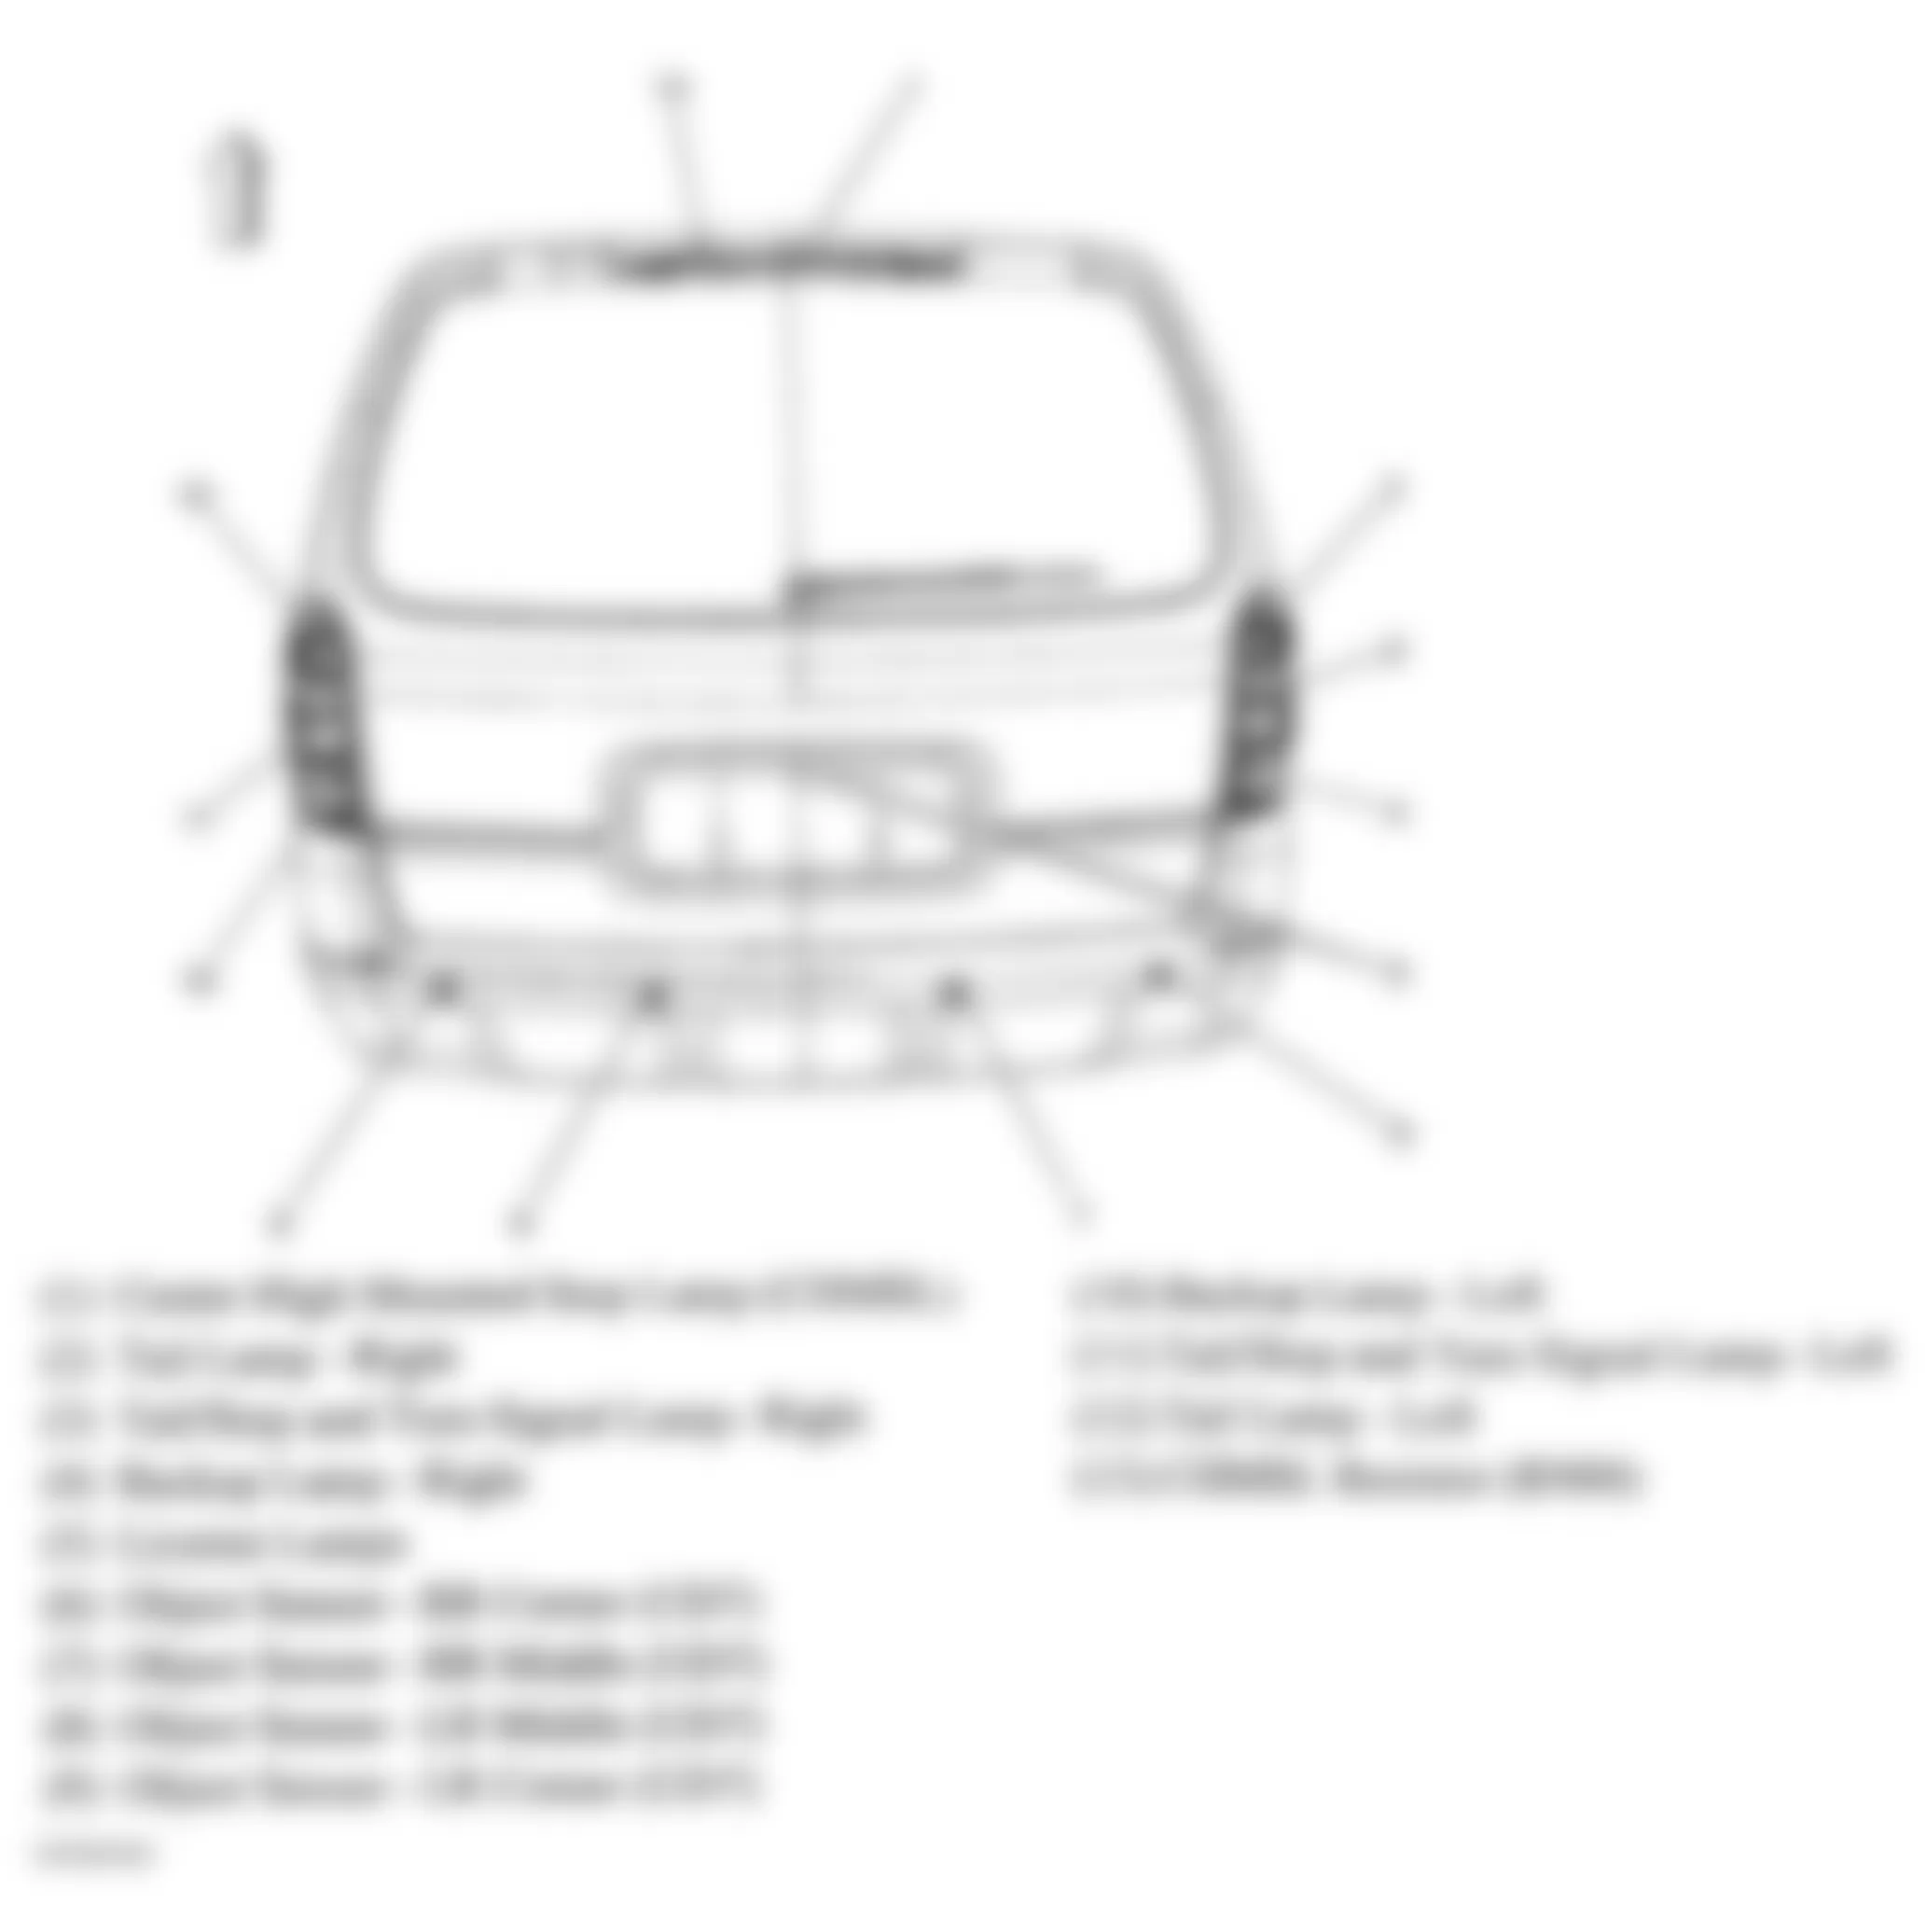 Buick Terraza CXL 2006 - Component Locations -  Tailgate Assembly